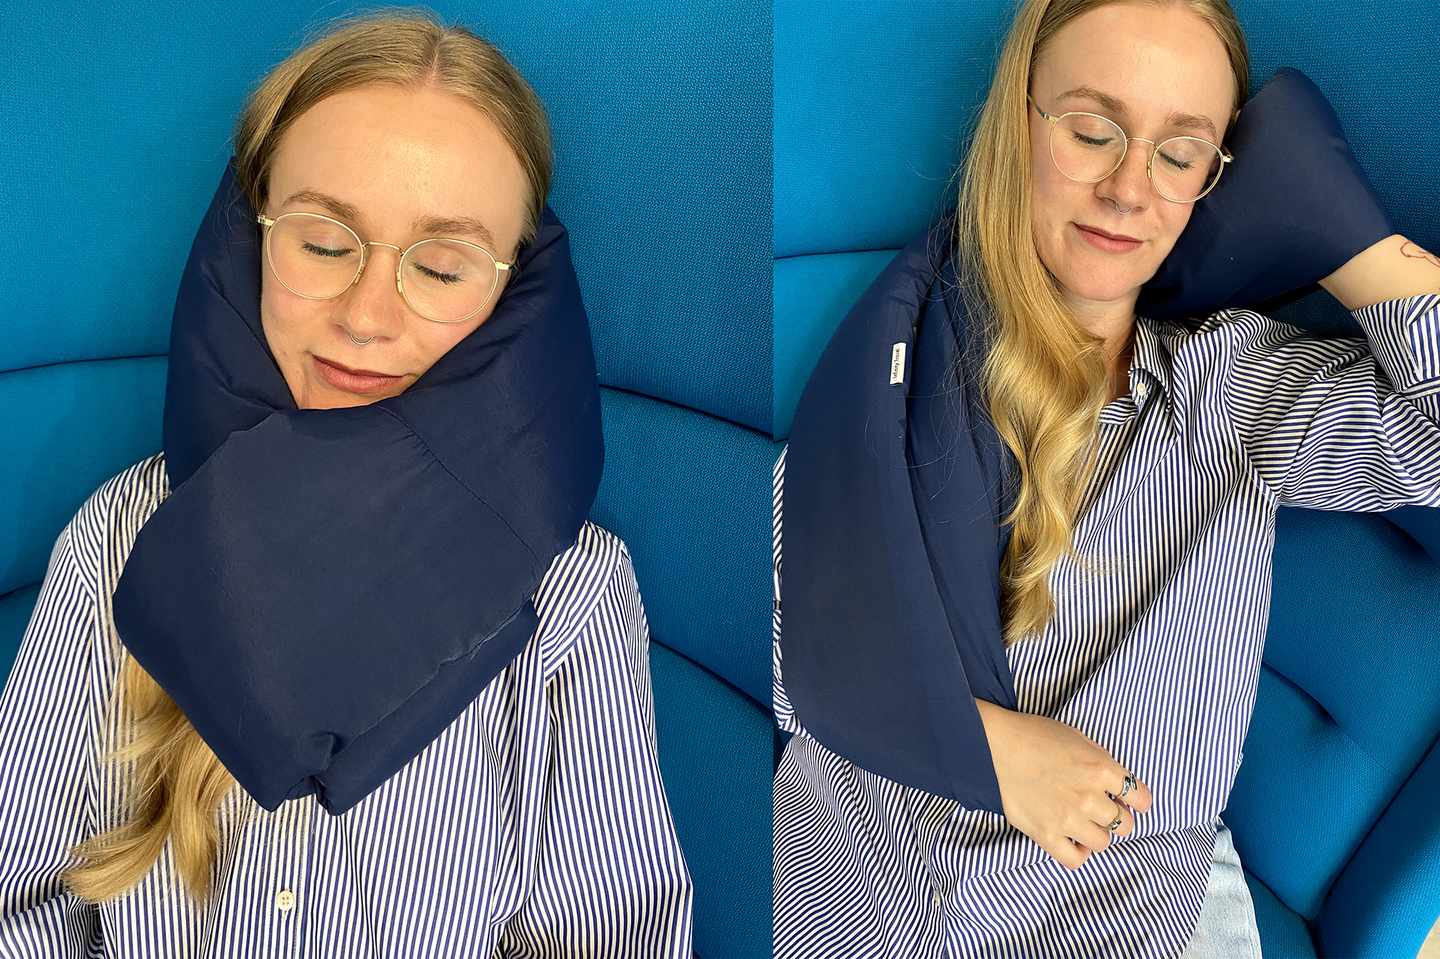 The best travel pillows of 2023: six comfy designs reviewed